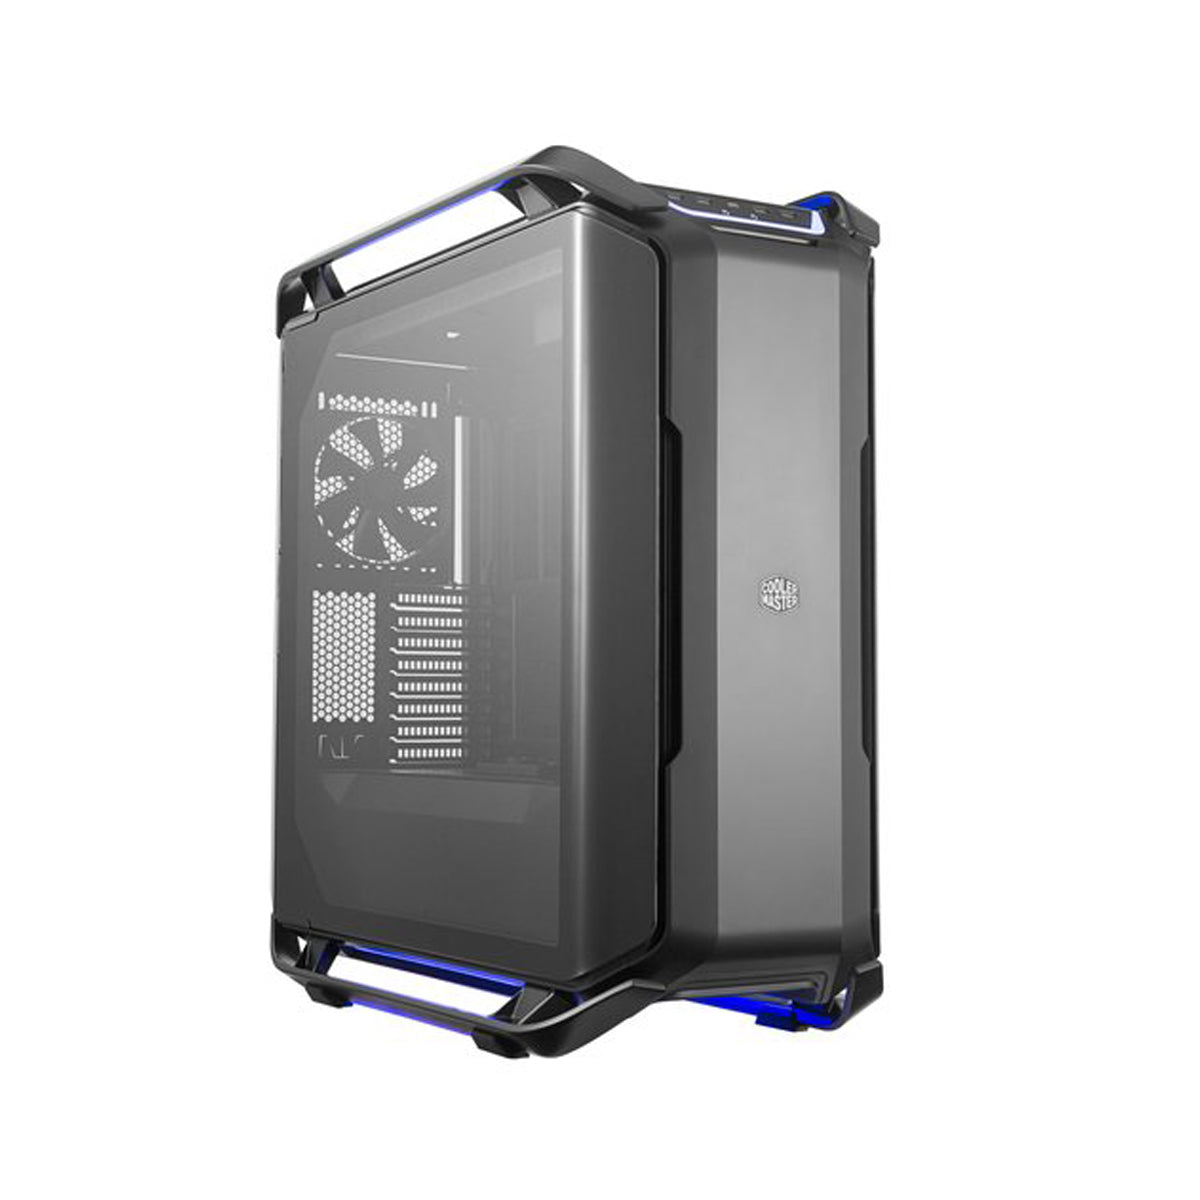 Cooler Master - Intel Core i7 - 2TB M.2 SSD - RTX 3080 - Waterkoeling - GamePC.BCM100109 - WiFi